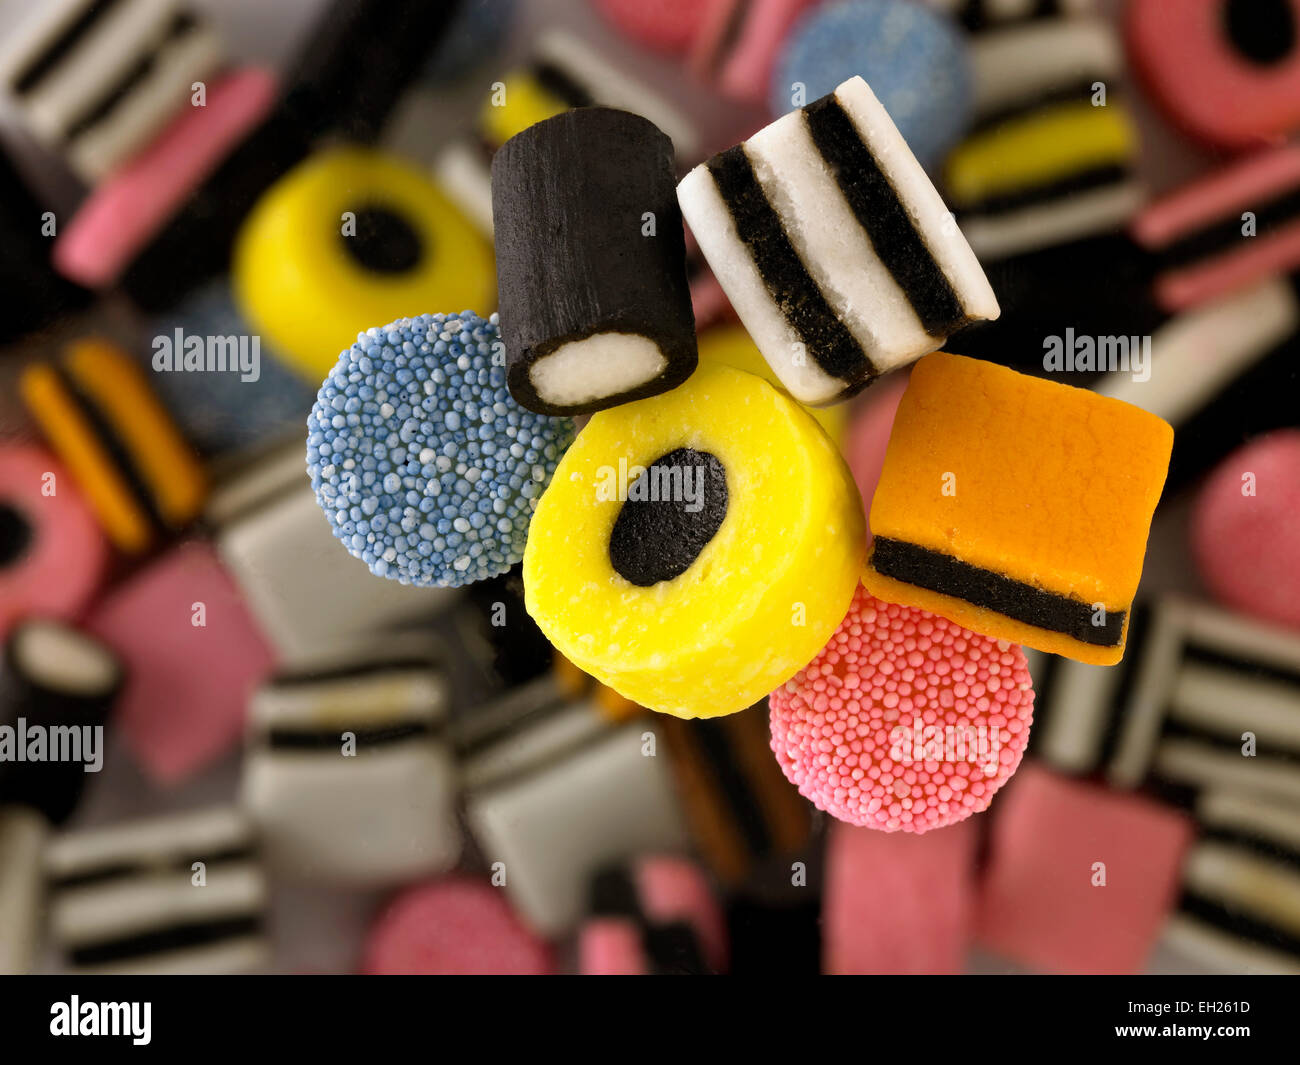 who invented licorice allsorts how did it get its name and where did the liqorice candy come from